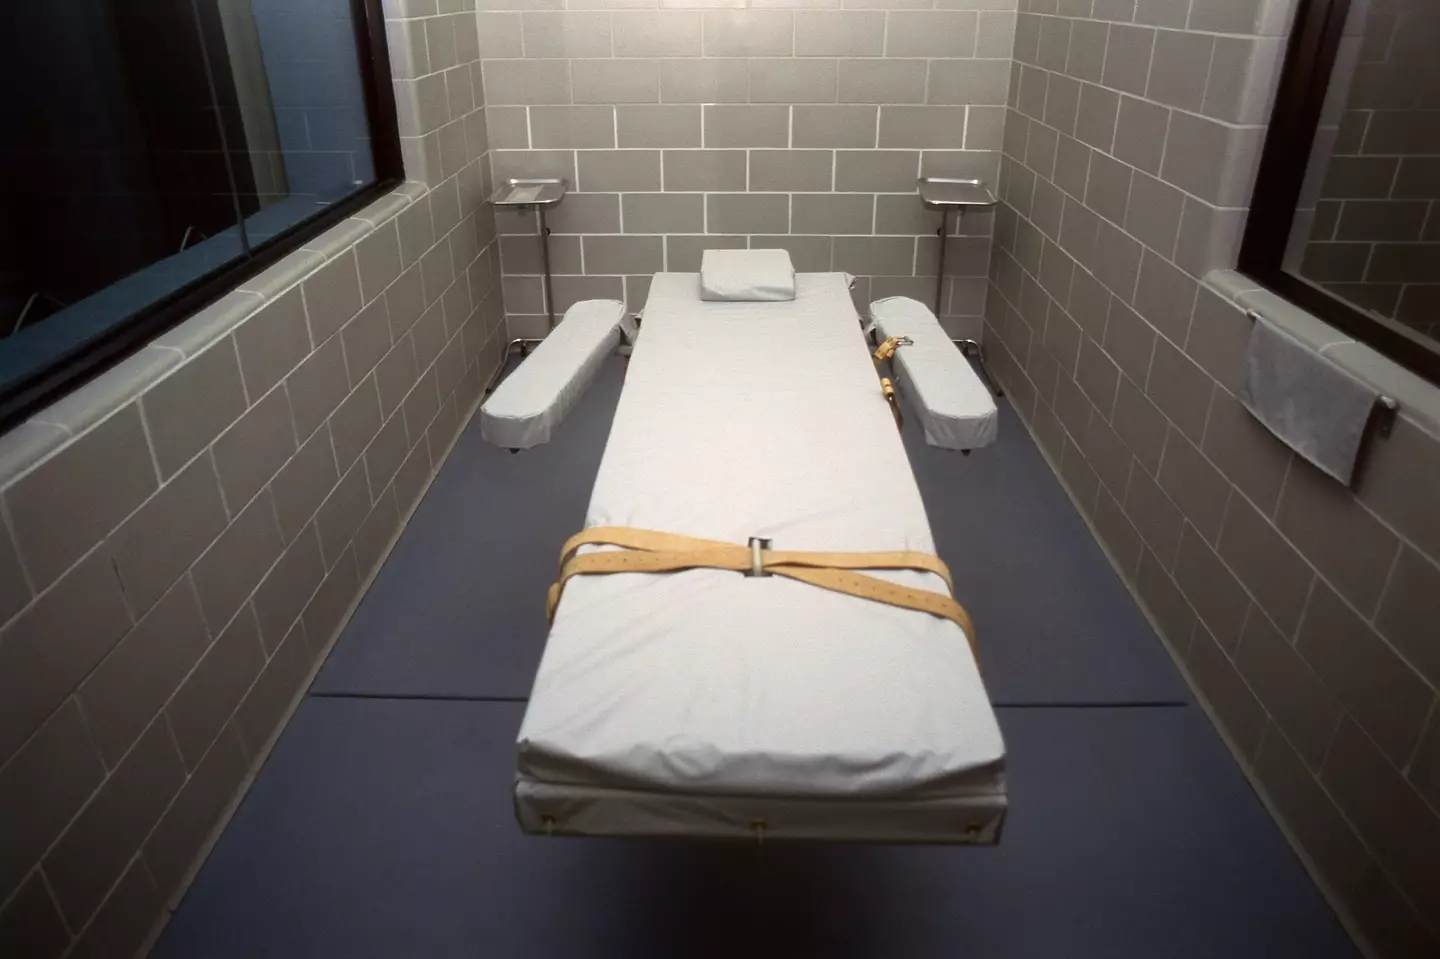 Nance has argued a lethal injection would cause undue pain.